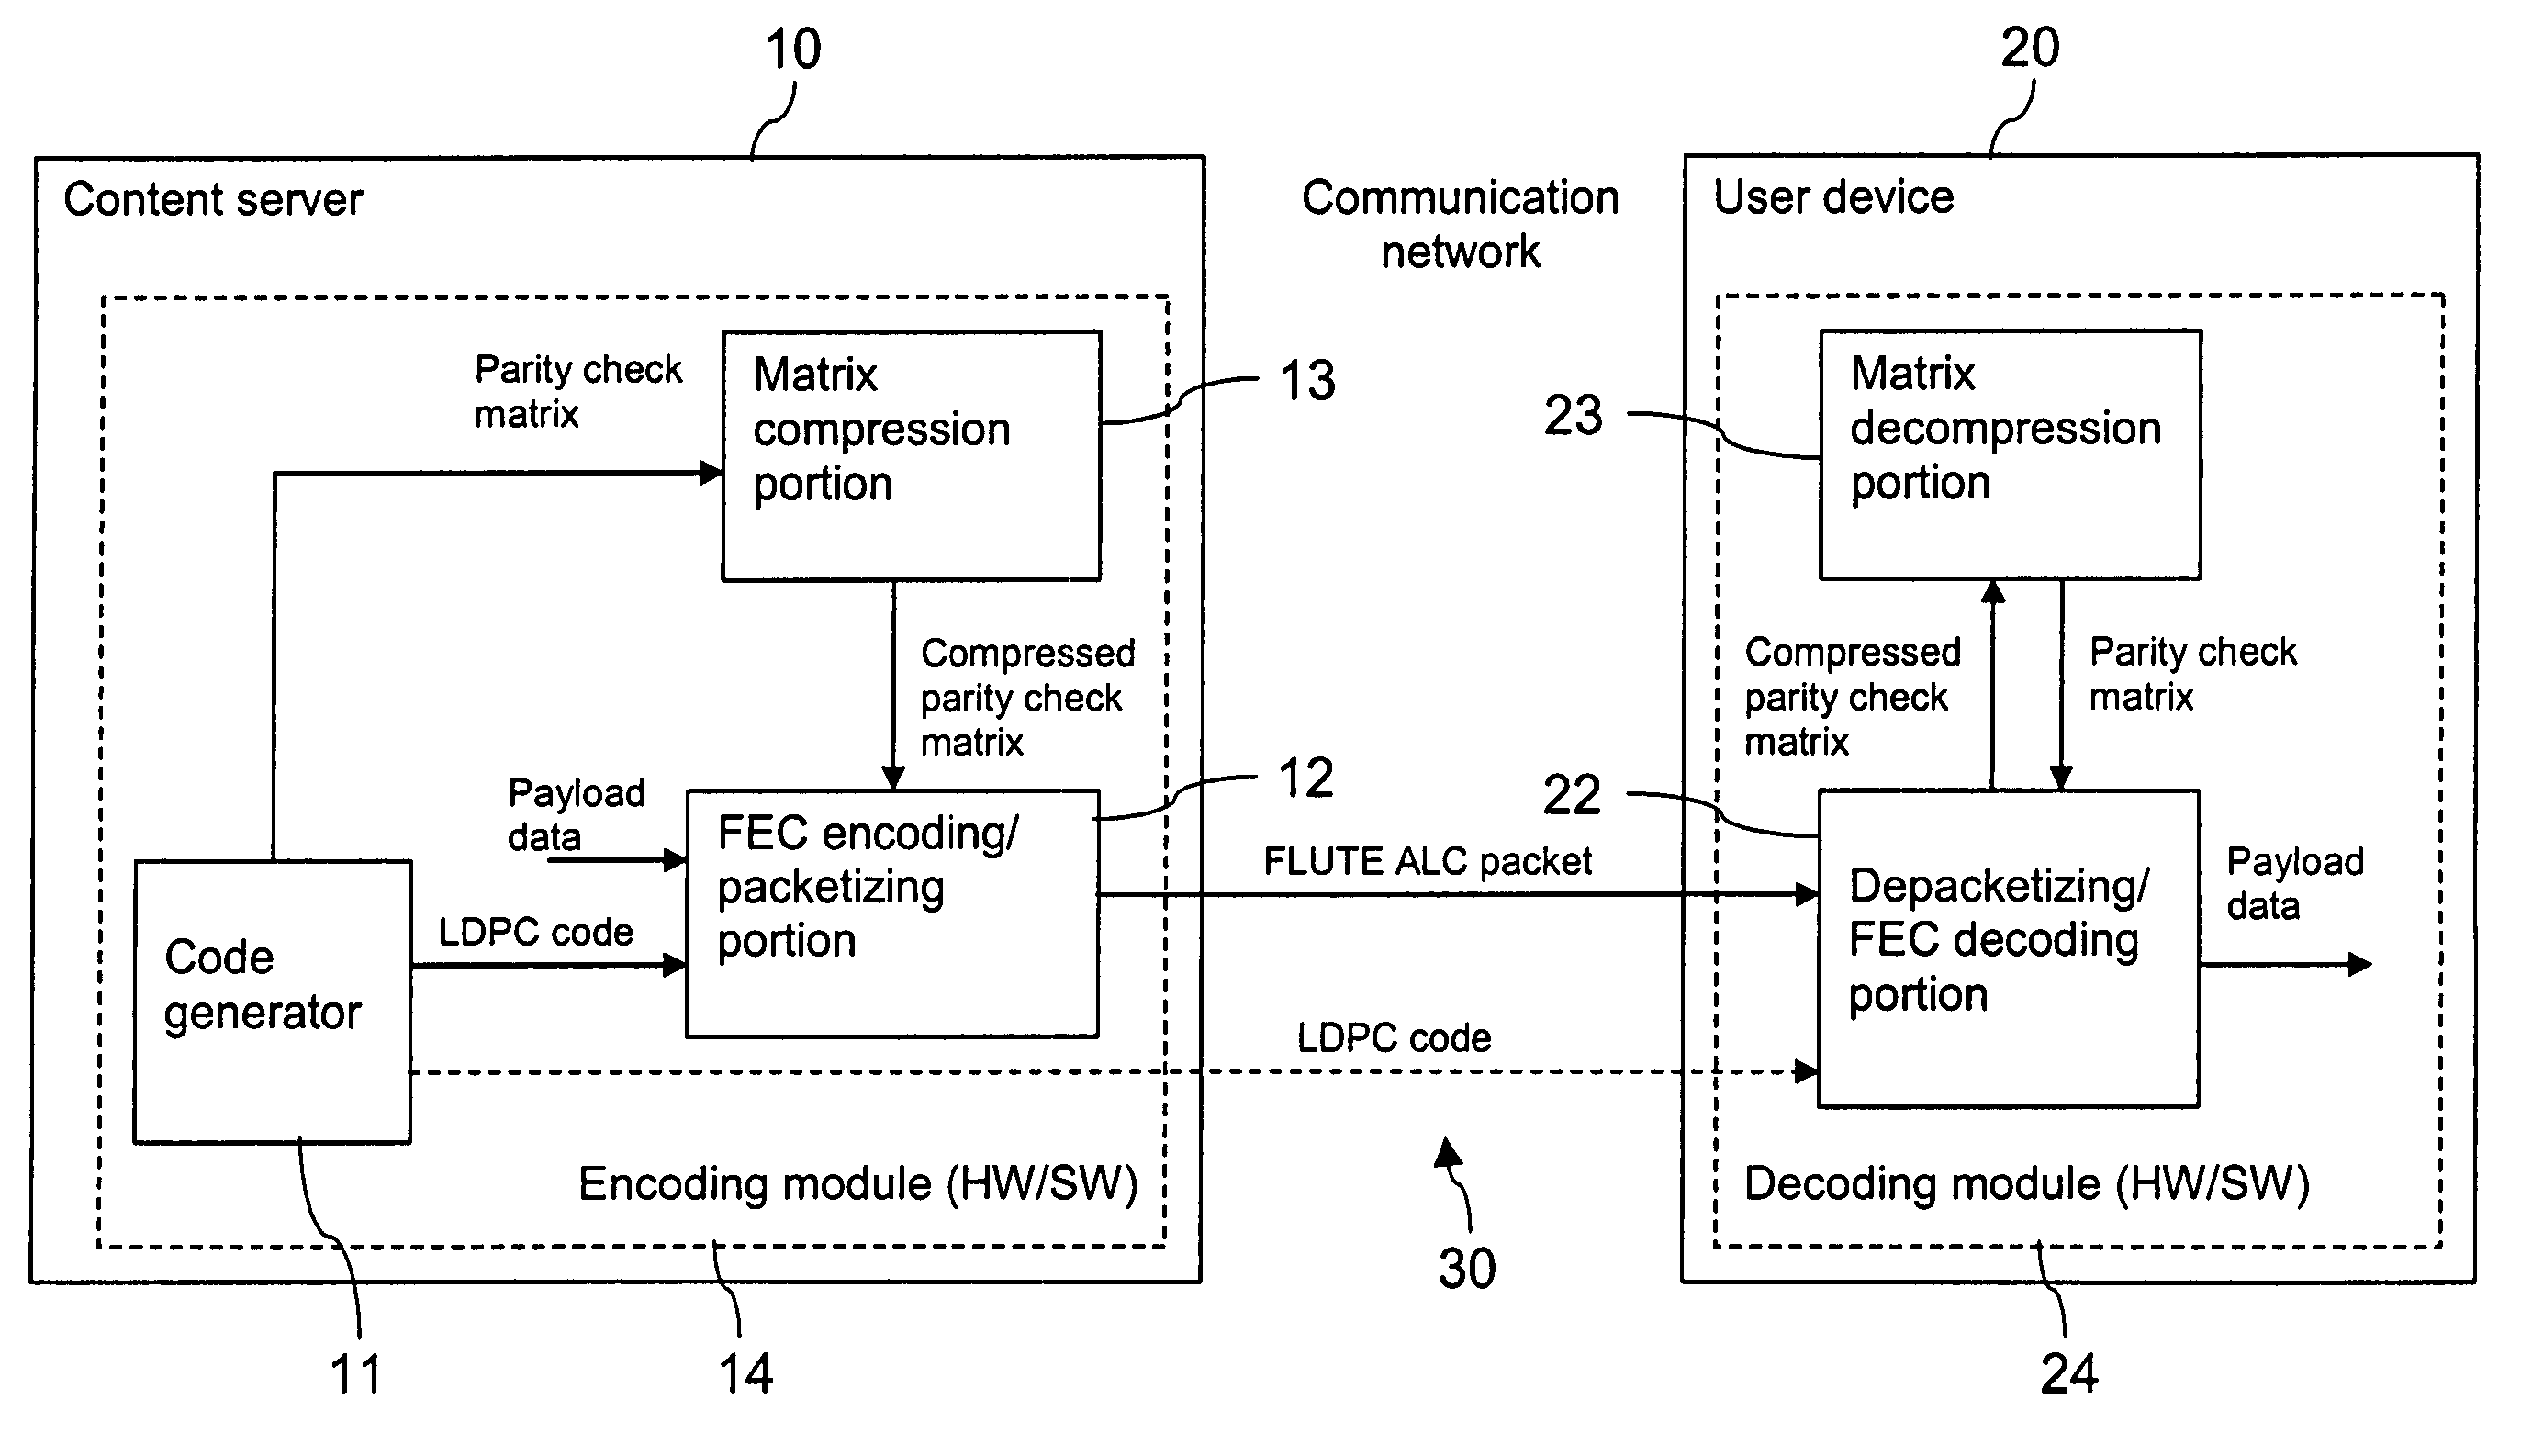 Encoding and decoding modules with forward error correction